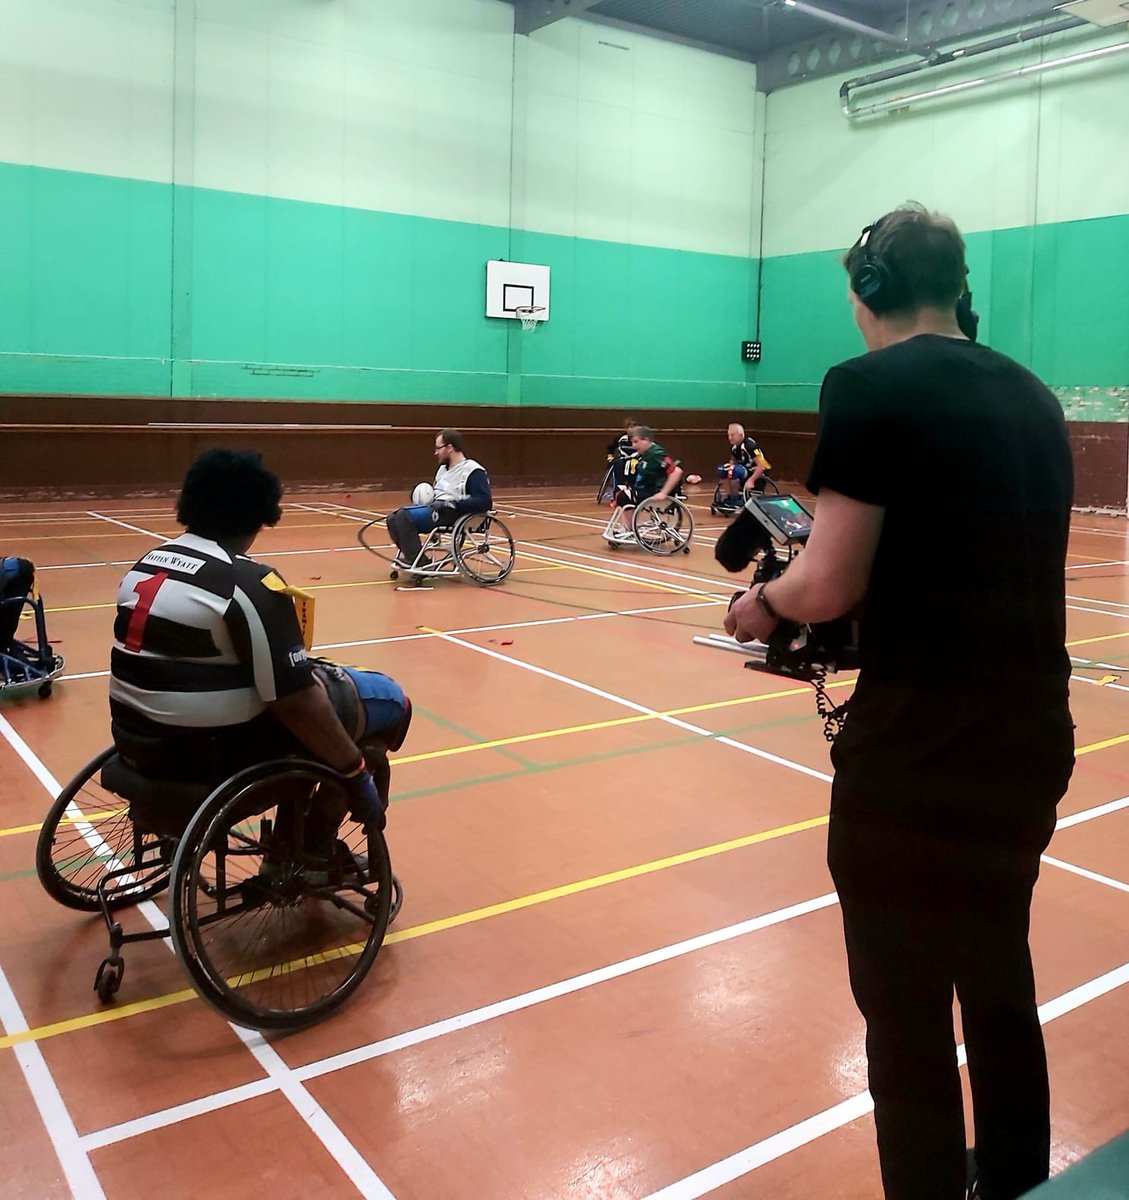 Wheelchair rugby league 🎥 being filmed for potential Amazon Prime / Netflix doc about Gravesend Dynamite player Shreen & 2 other athletes from other sports @WheelchairRL @Six_Again @RachelAnkomahGh @debsknig @equal_sport @HourKent @IsaacStatue @Active_Kent @confident_queen